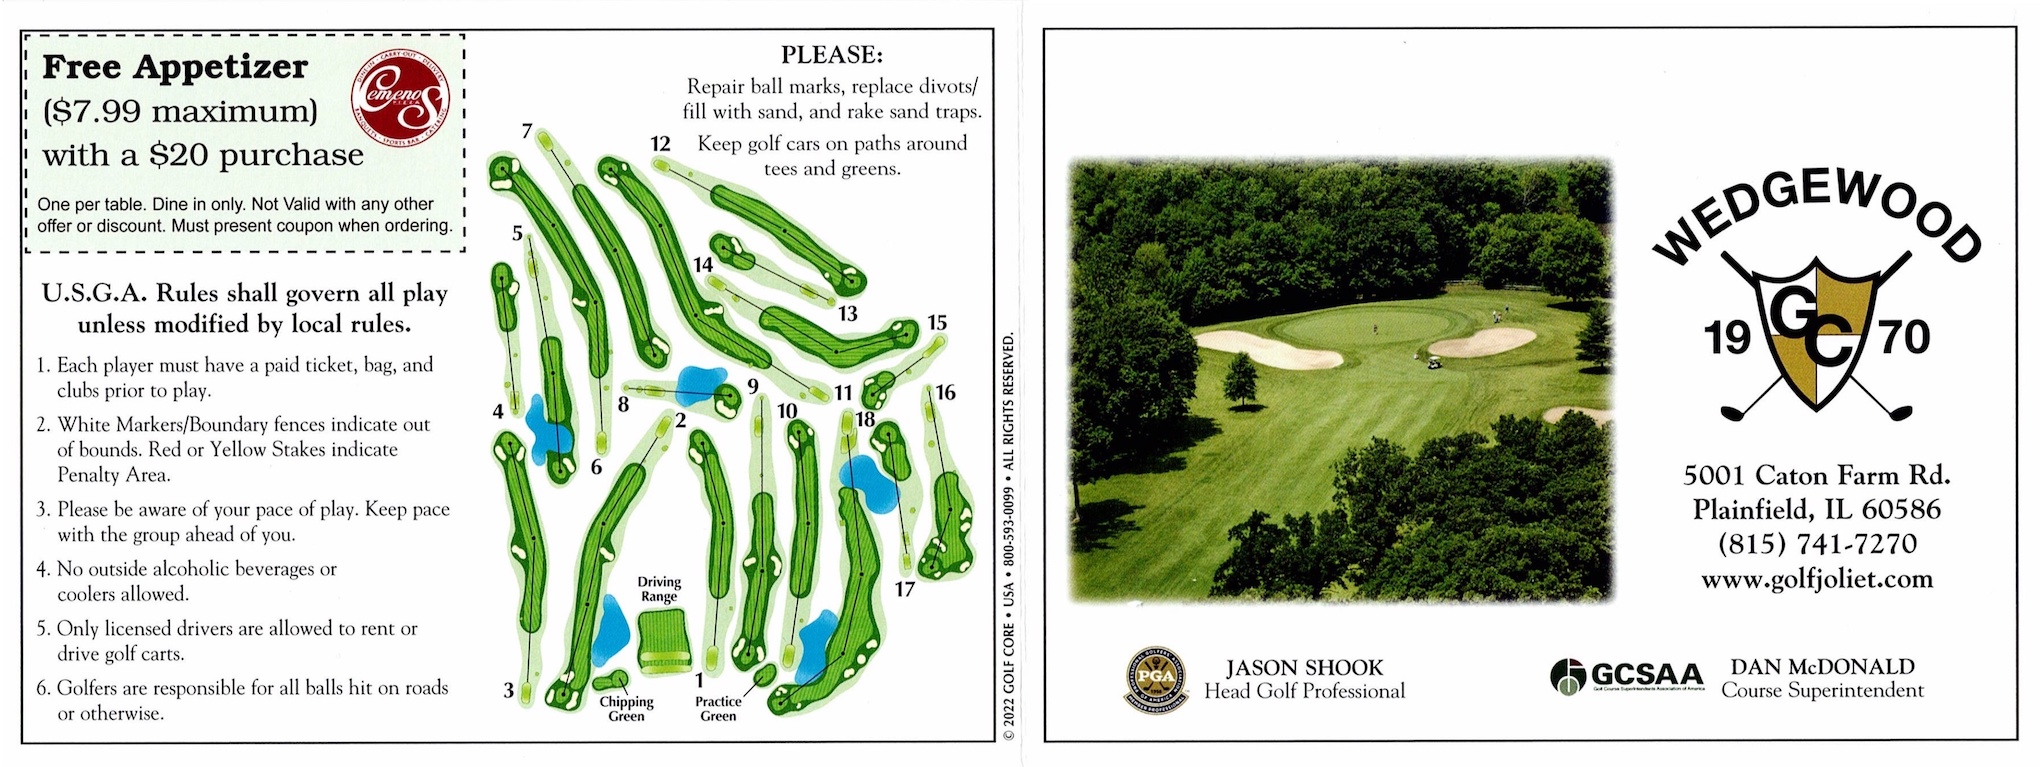 Scan of the scorecard from Wedgewood Golf Course in Plainfield, Illinois. 